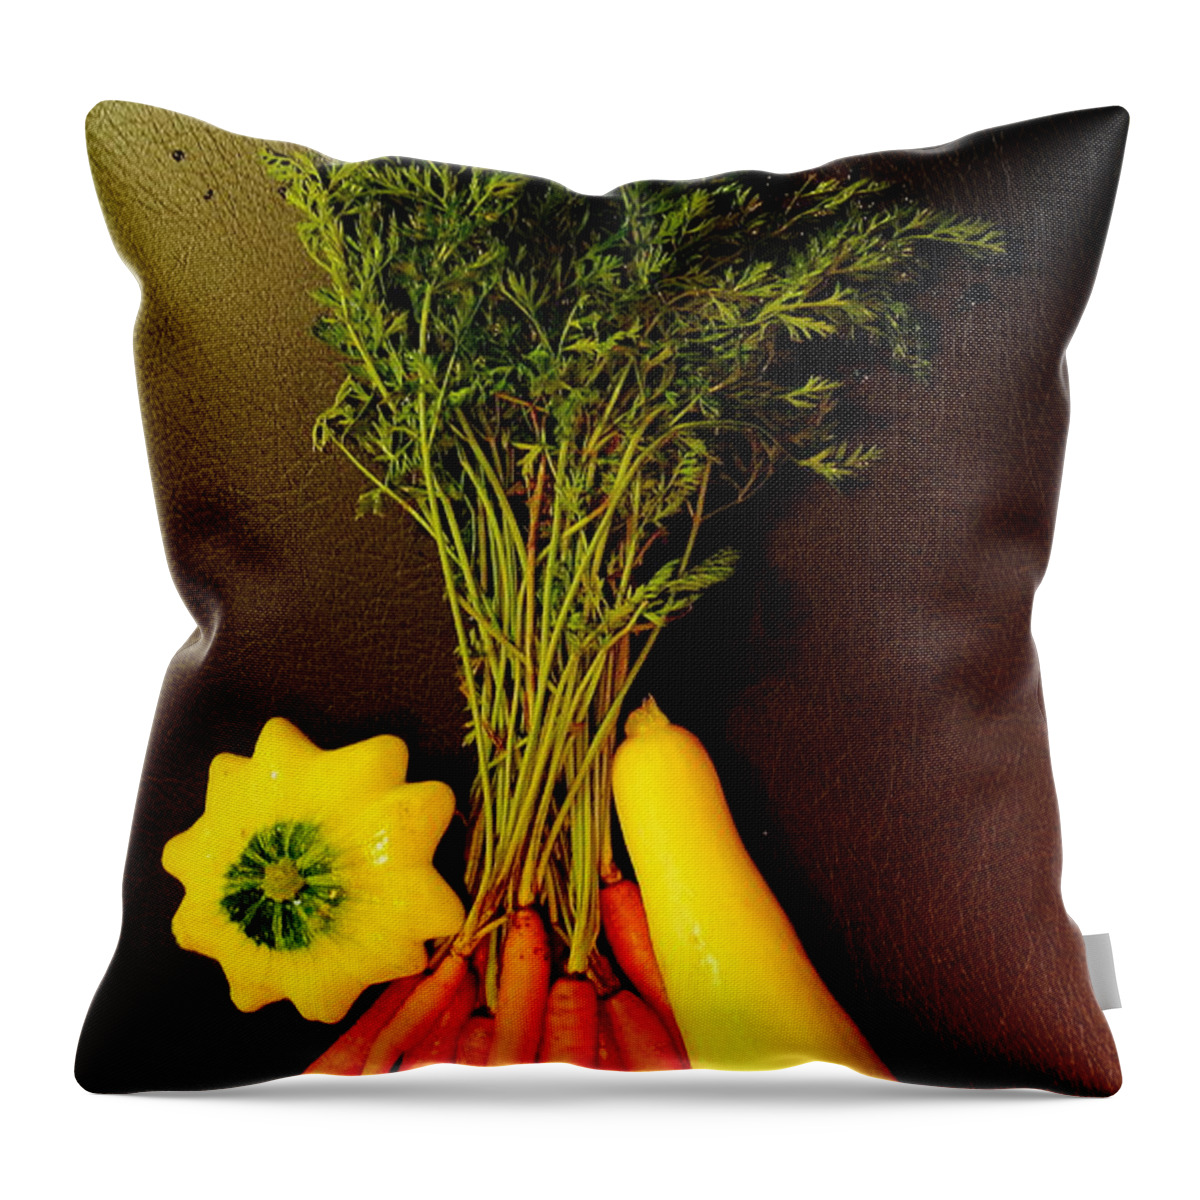 Vegetables Throw Pillow featuring the photograph Carrots and Squash by Allen Nice-Webb